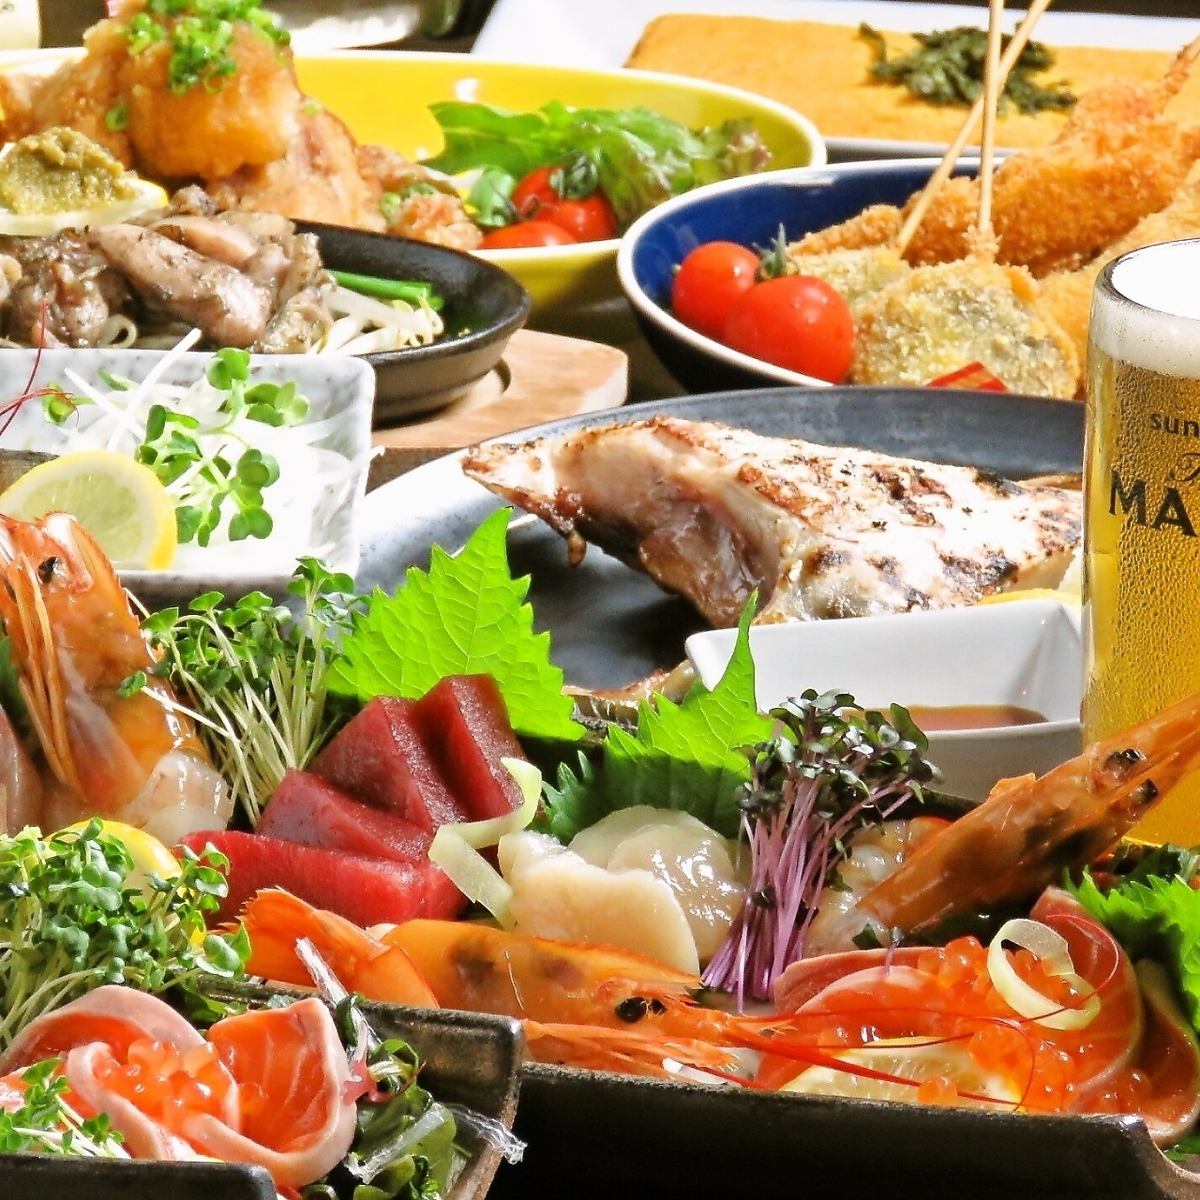 The all-you-can-eat and drink plan is very popular◎Available from 3,000 yen for 120 minutes♪